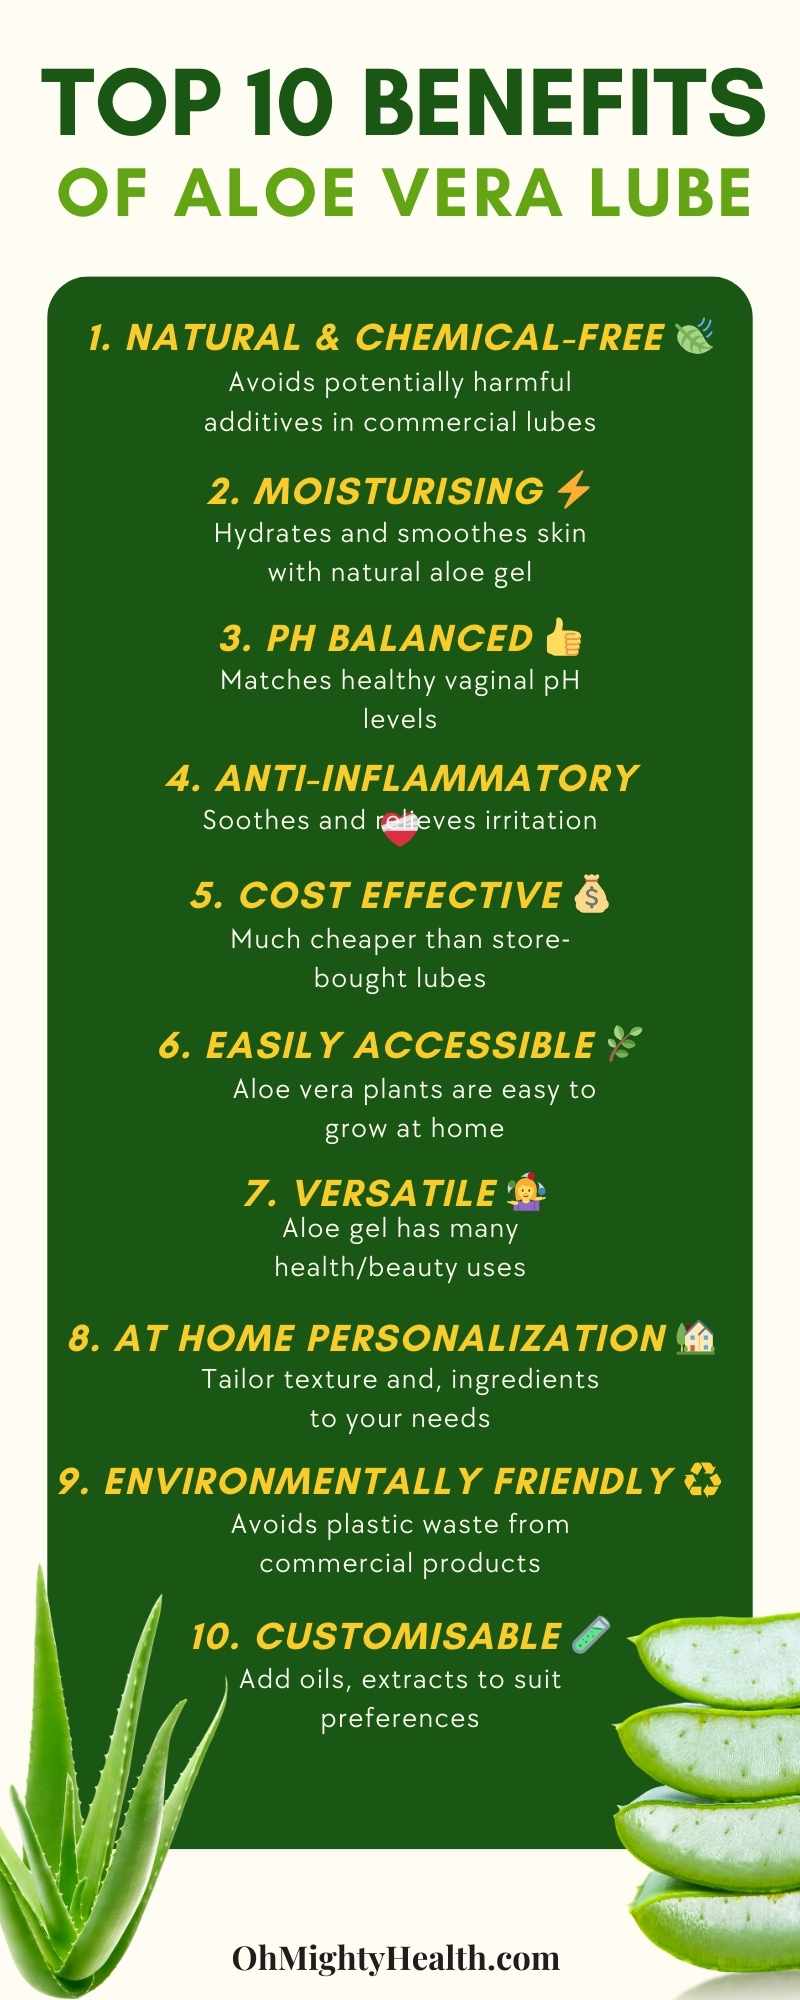 Infographic with icons and text listing the top 10 benefits of using aloe vera gel as a natural, homemade intimate lubricant. Benefits highlighted include being chemical-free, pH balanced, anti-inflammatory, cost effective, customisable, and more.